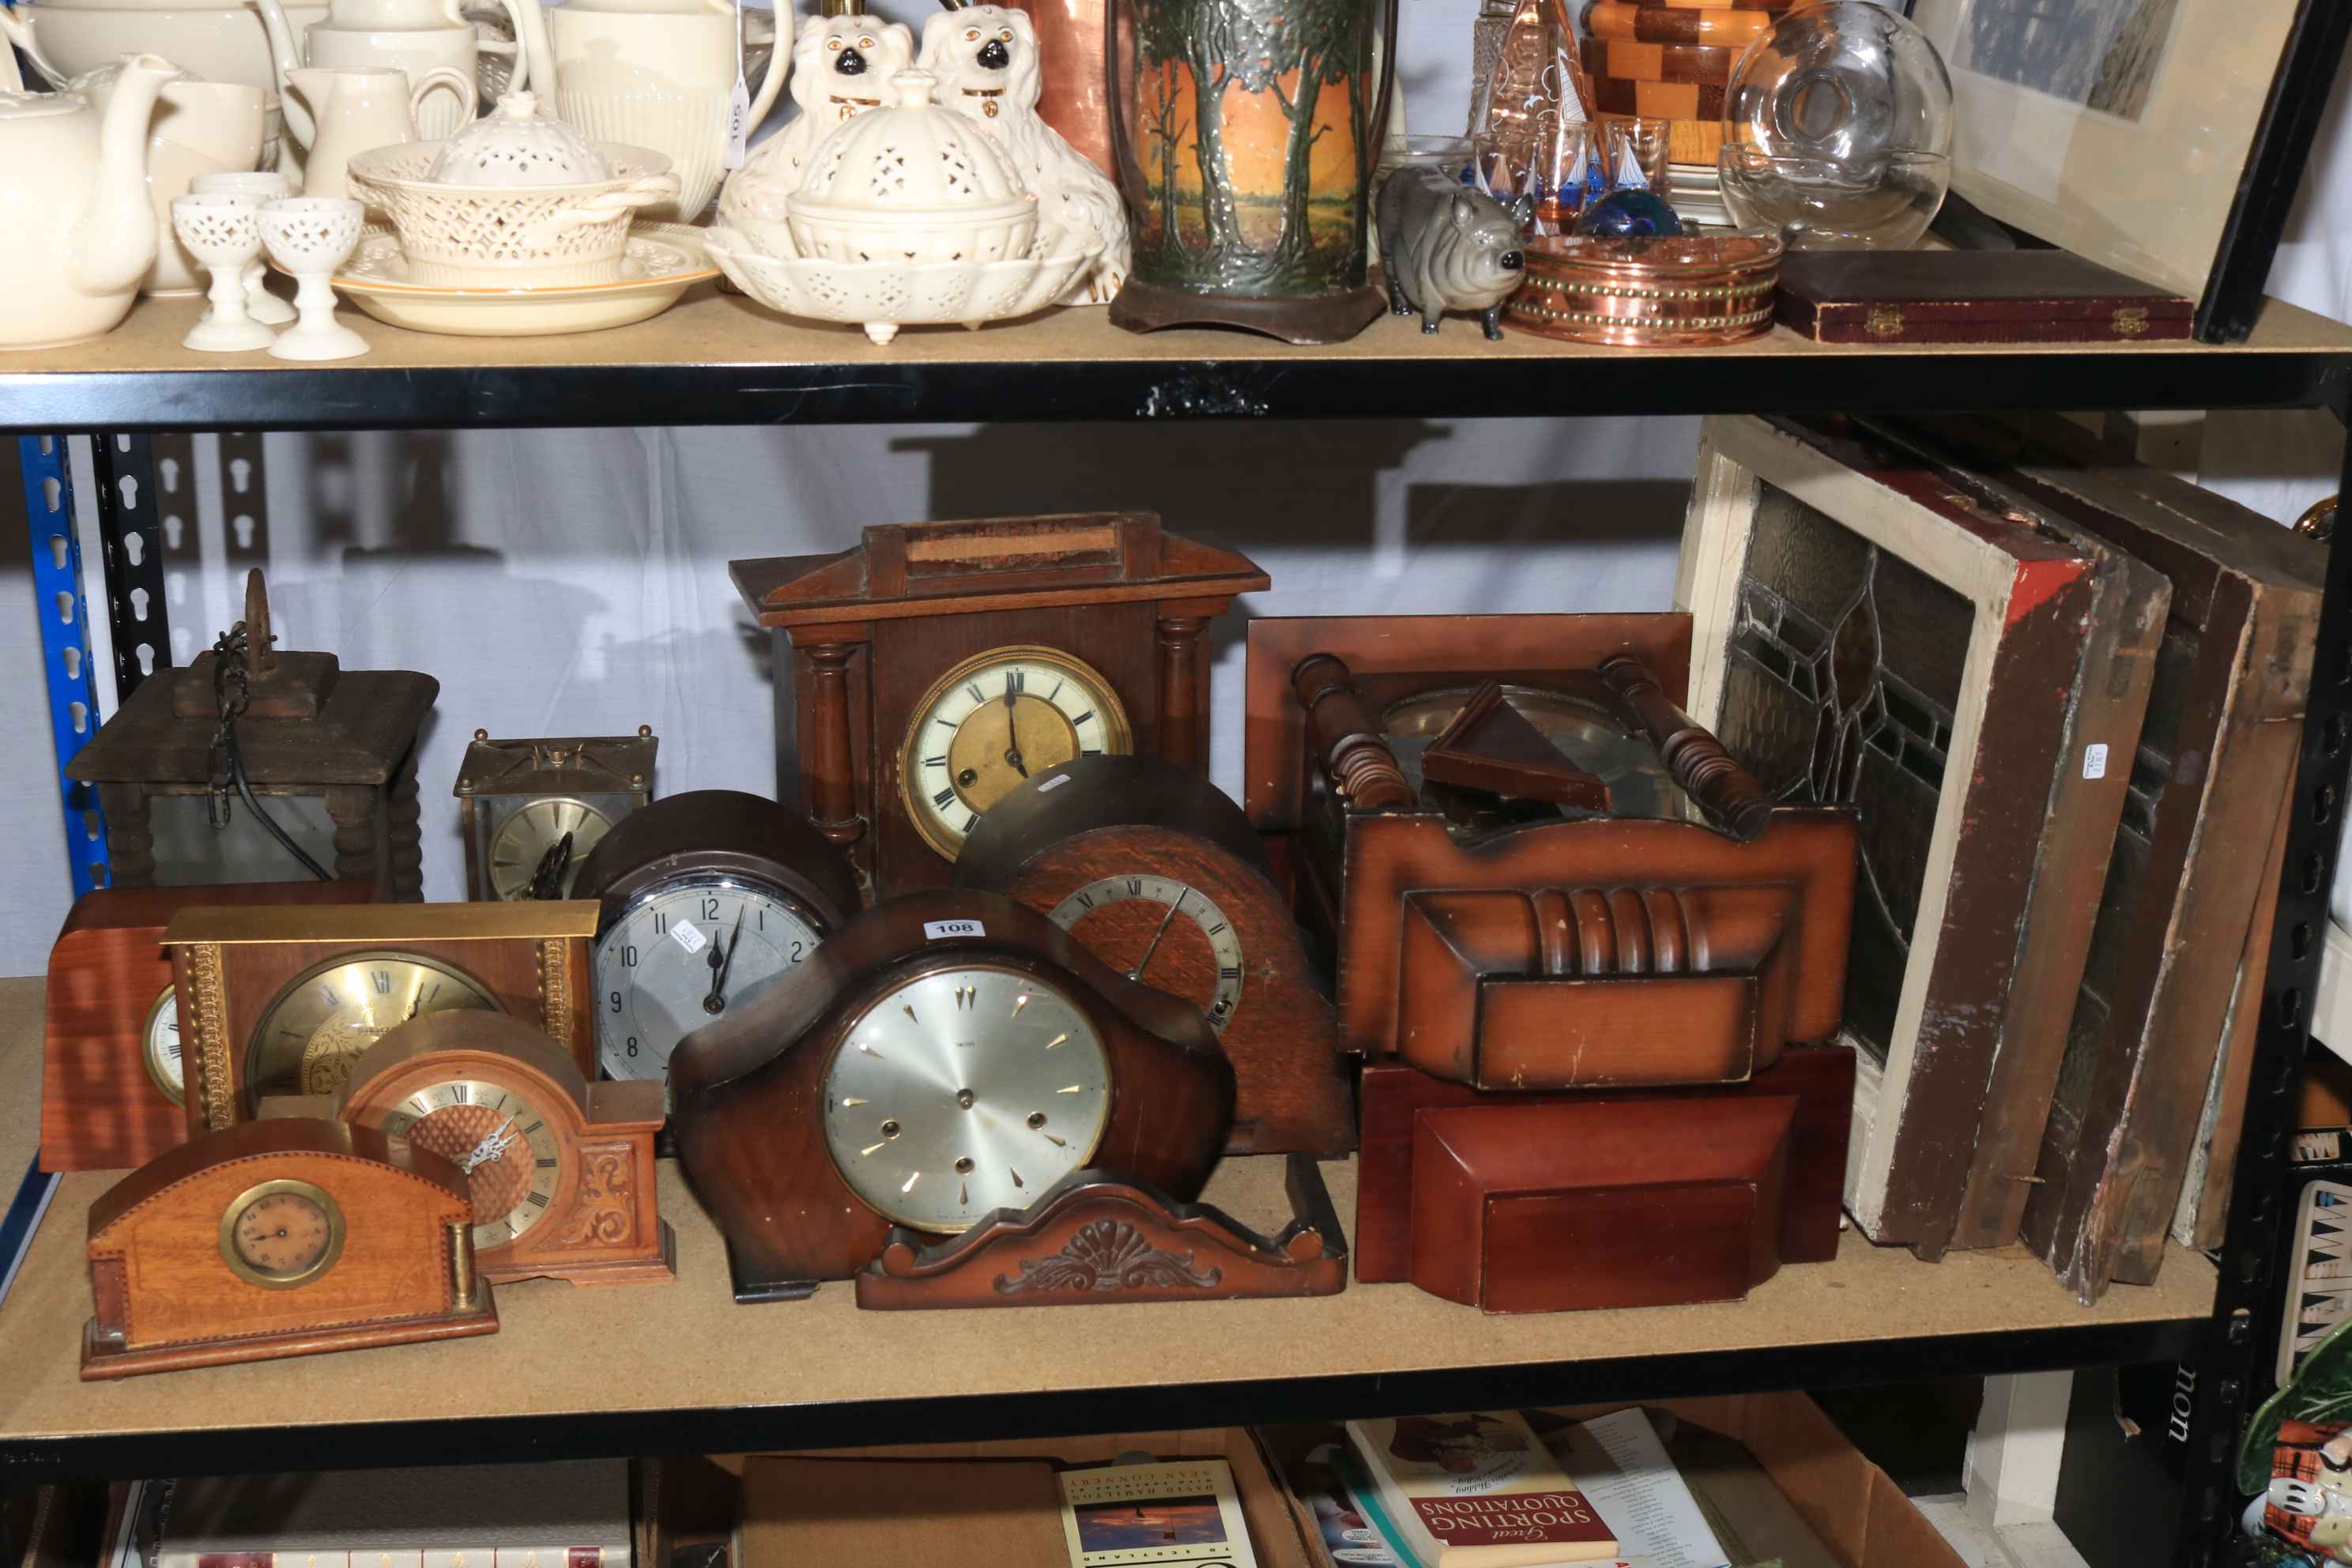 Collection of vintage mantel clocks and wall clocks together with stain glass windows and hanging